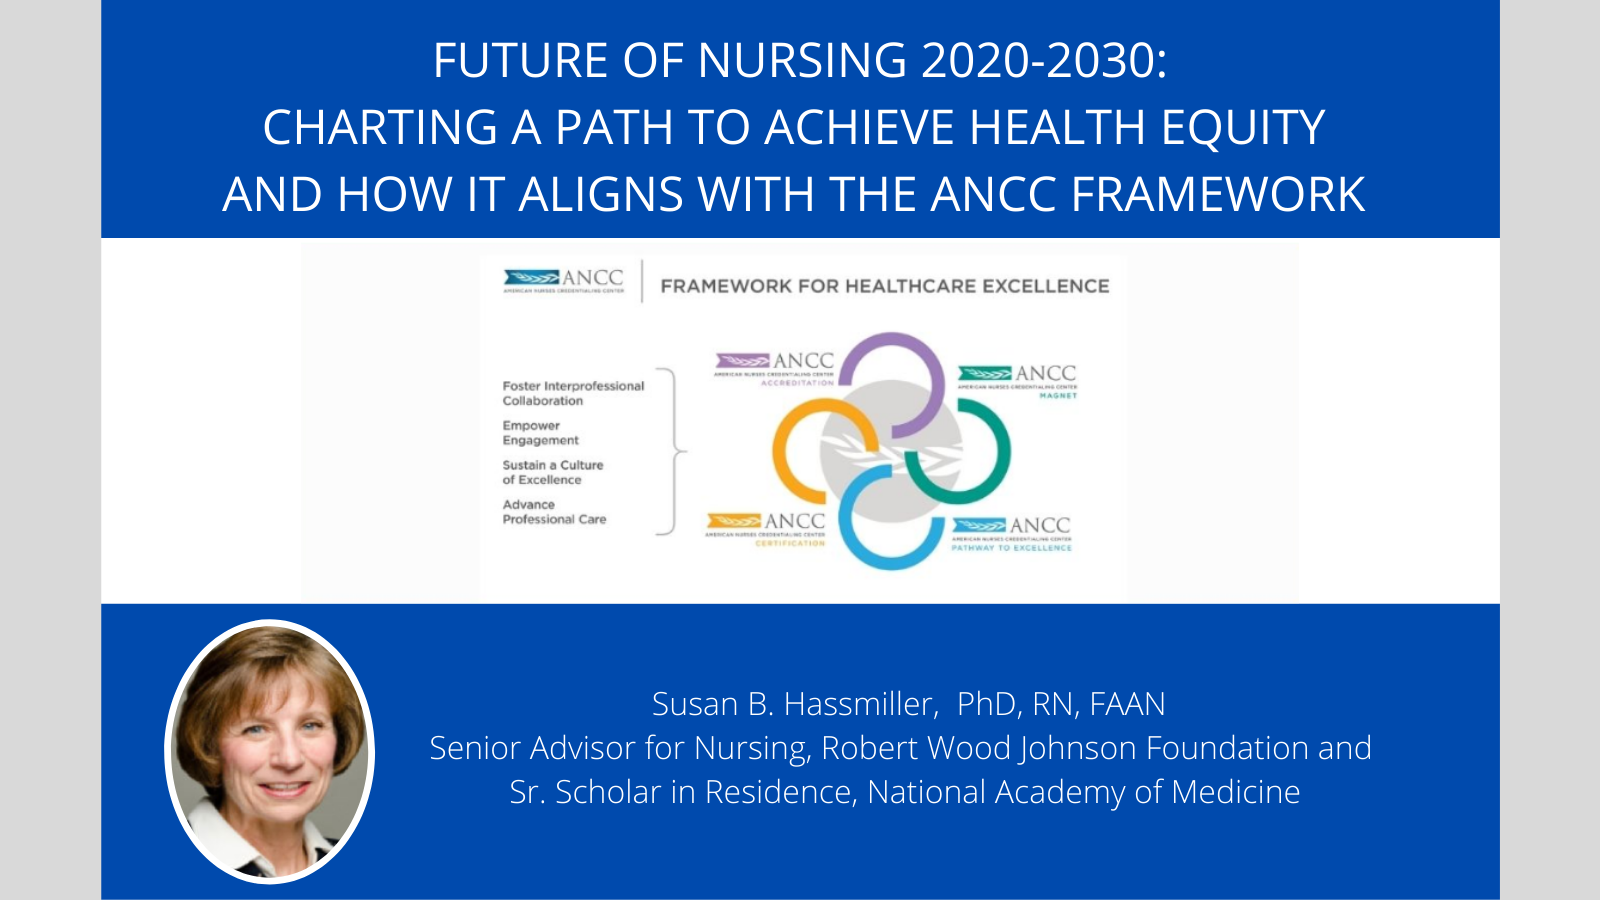 FUTURE OF NURSING 2020-2030 CHARTING A PATH TO ACHIEVE HEALTH EQUITY AND HOW IT ALIGNS WITH THE ANCC FRAMEWORK.png